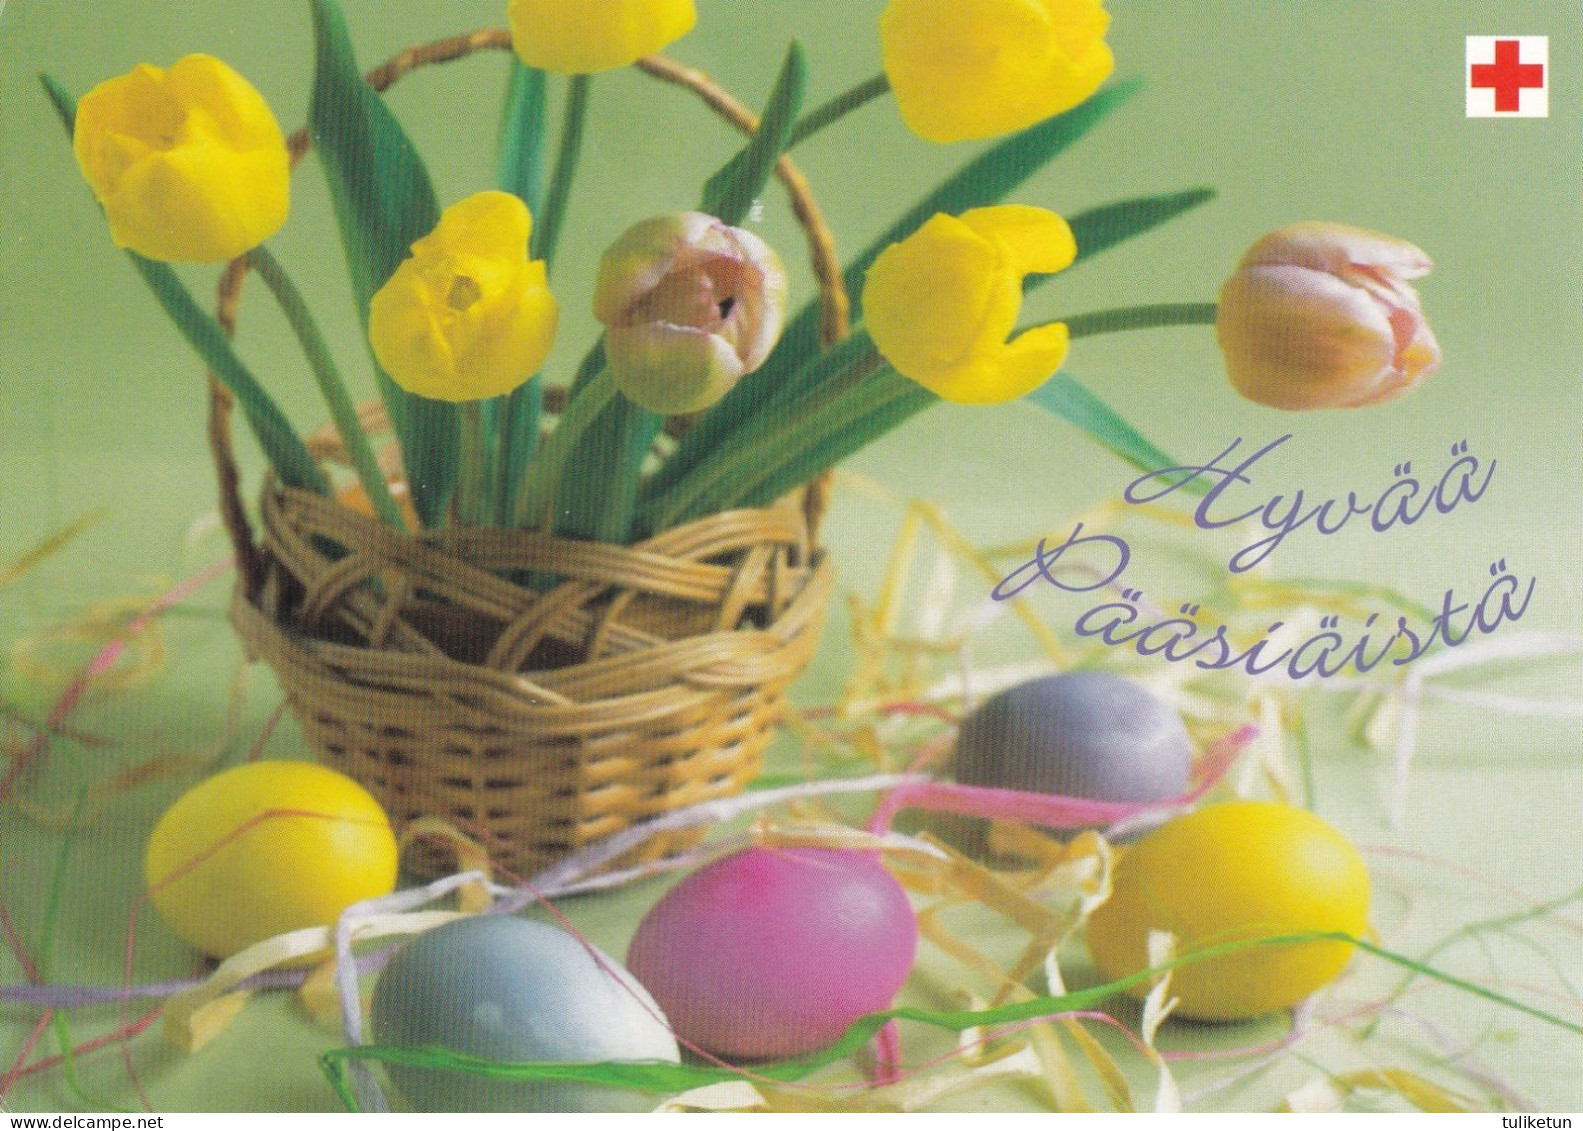 Easter Flowers - Tulips - Eggs - Red Cross 2004 - Postal Stationery - Suomi Finland - Postage Paid - Postal Stationery